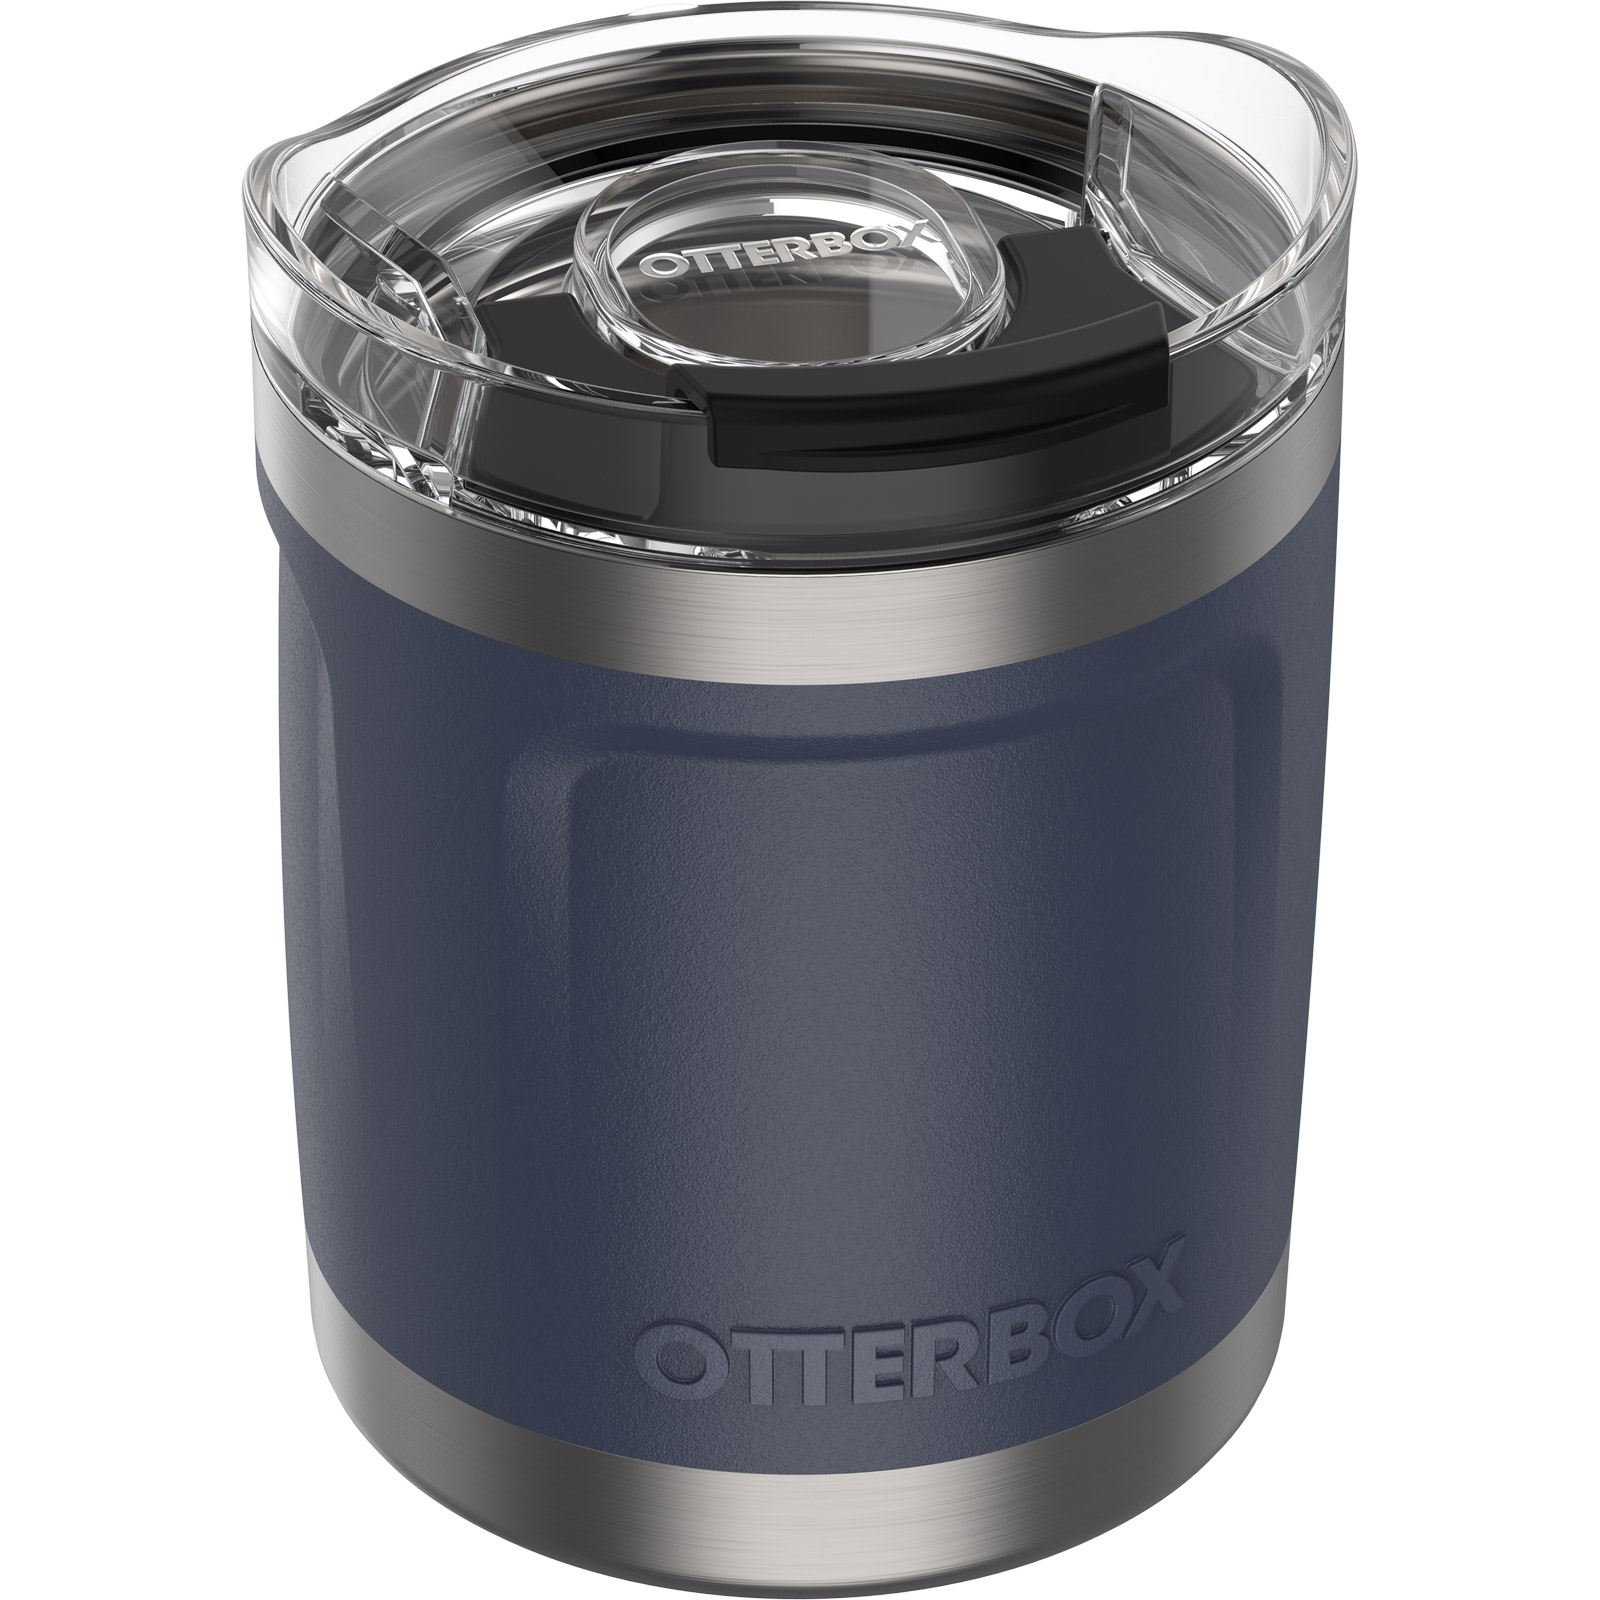 Elevate Your Drinkware: OtterBox Announces New Elevation Tumbler